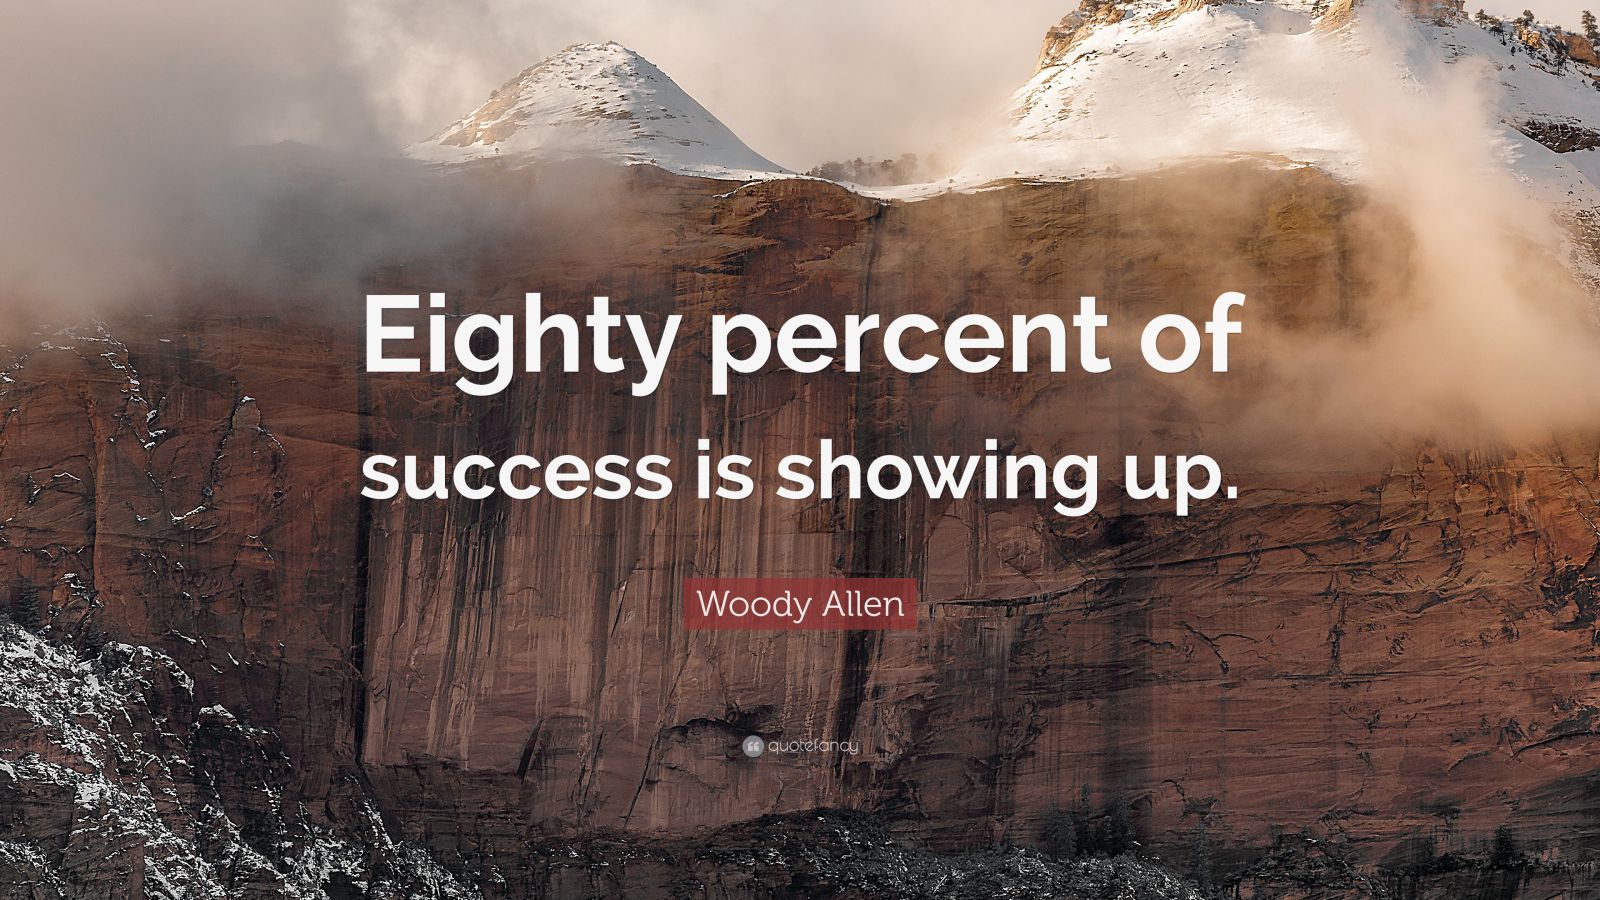 Woody Allen Quote “eighty Percent Of Success Is Showing Up” 23 Wallpapers Quotefancy 2306